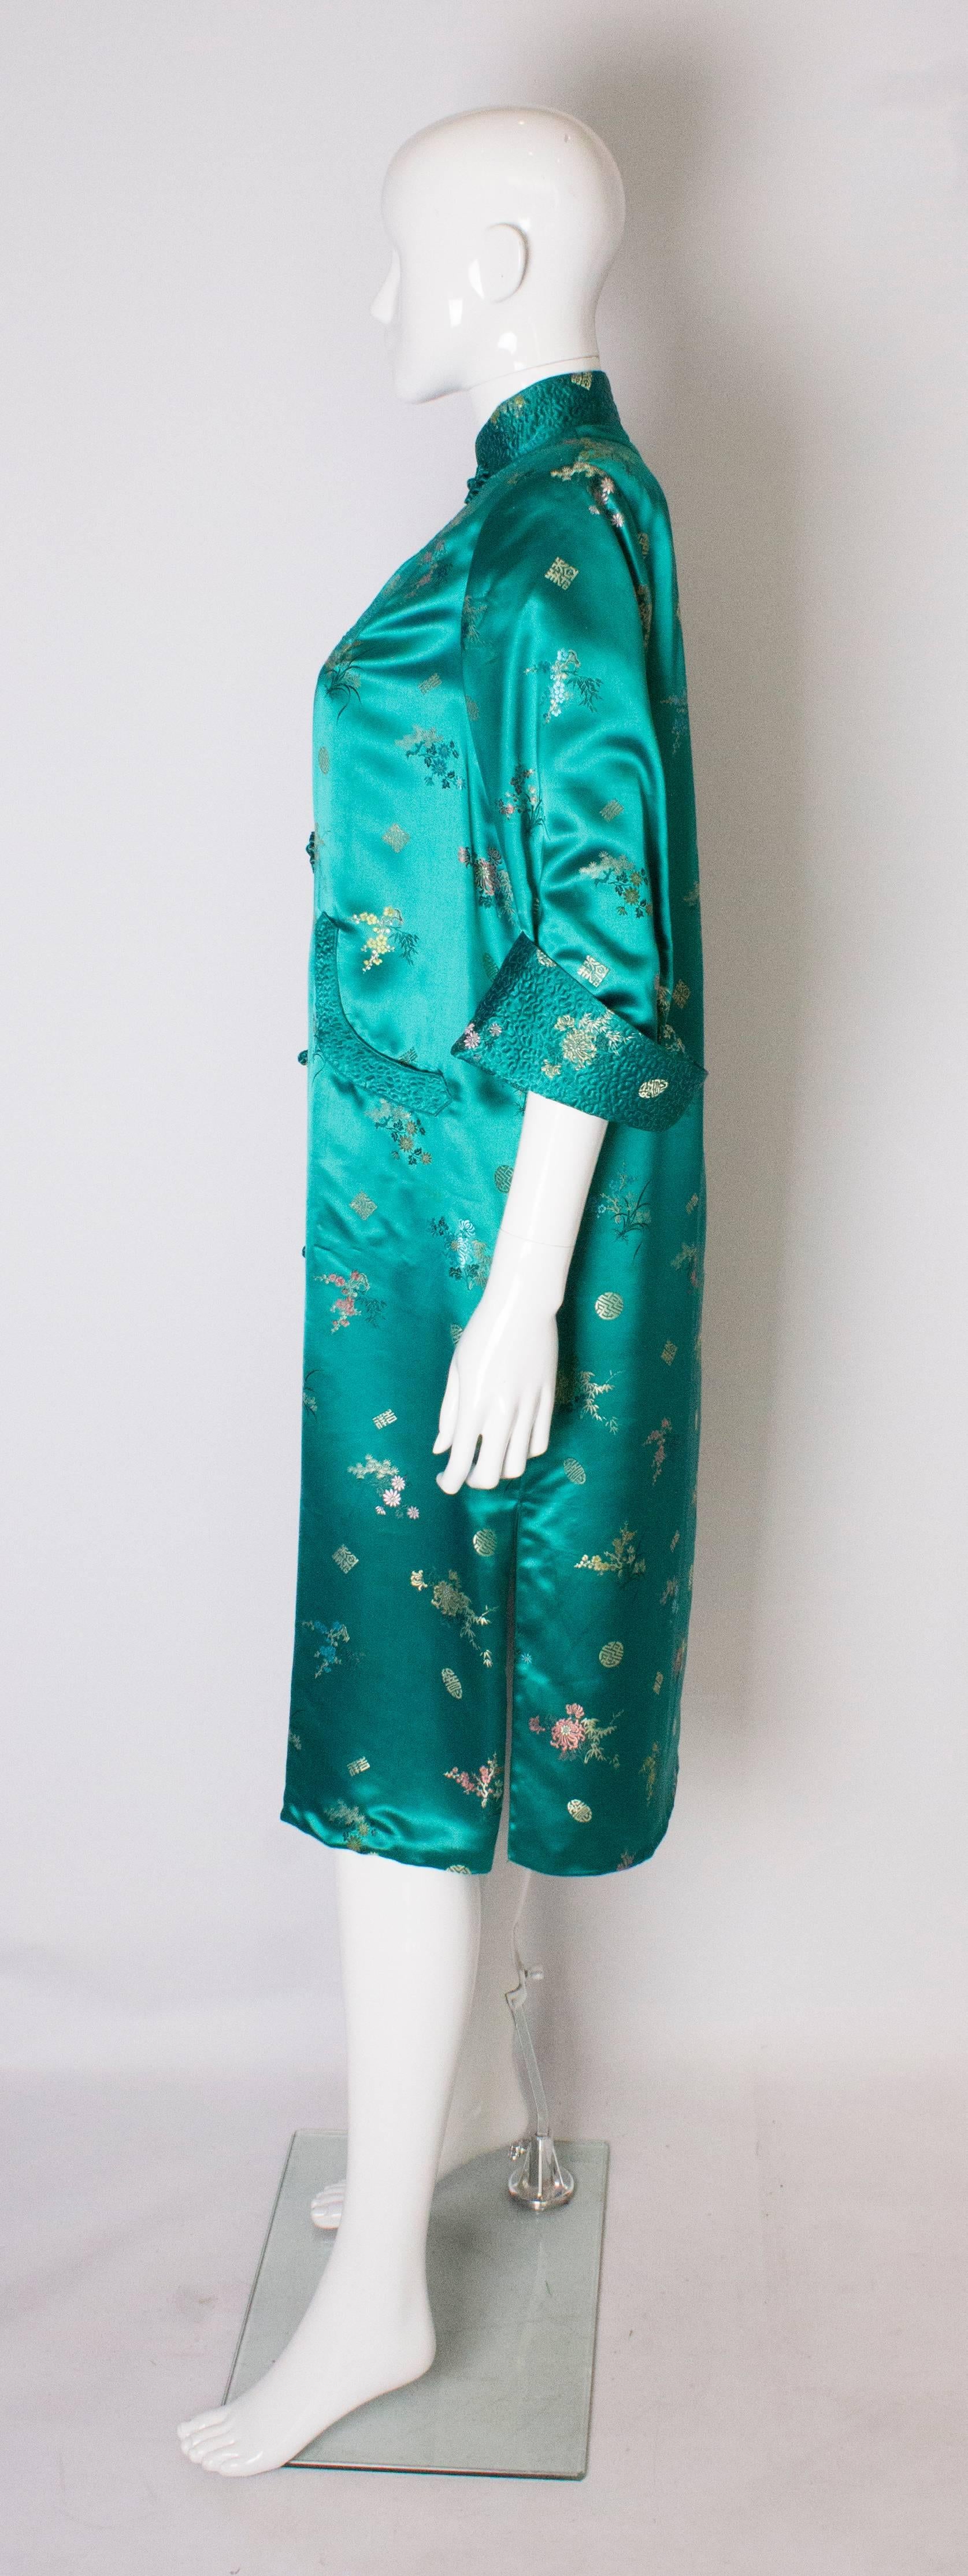 Women's A Vintage 1970s turquoise Chinese Coat with Standup Collar & Decorative Pockets